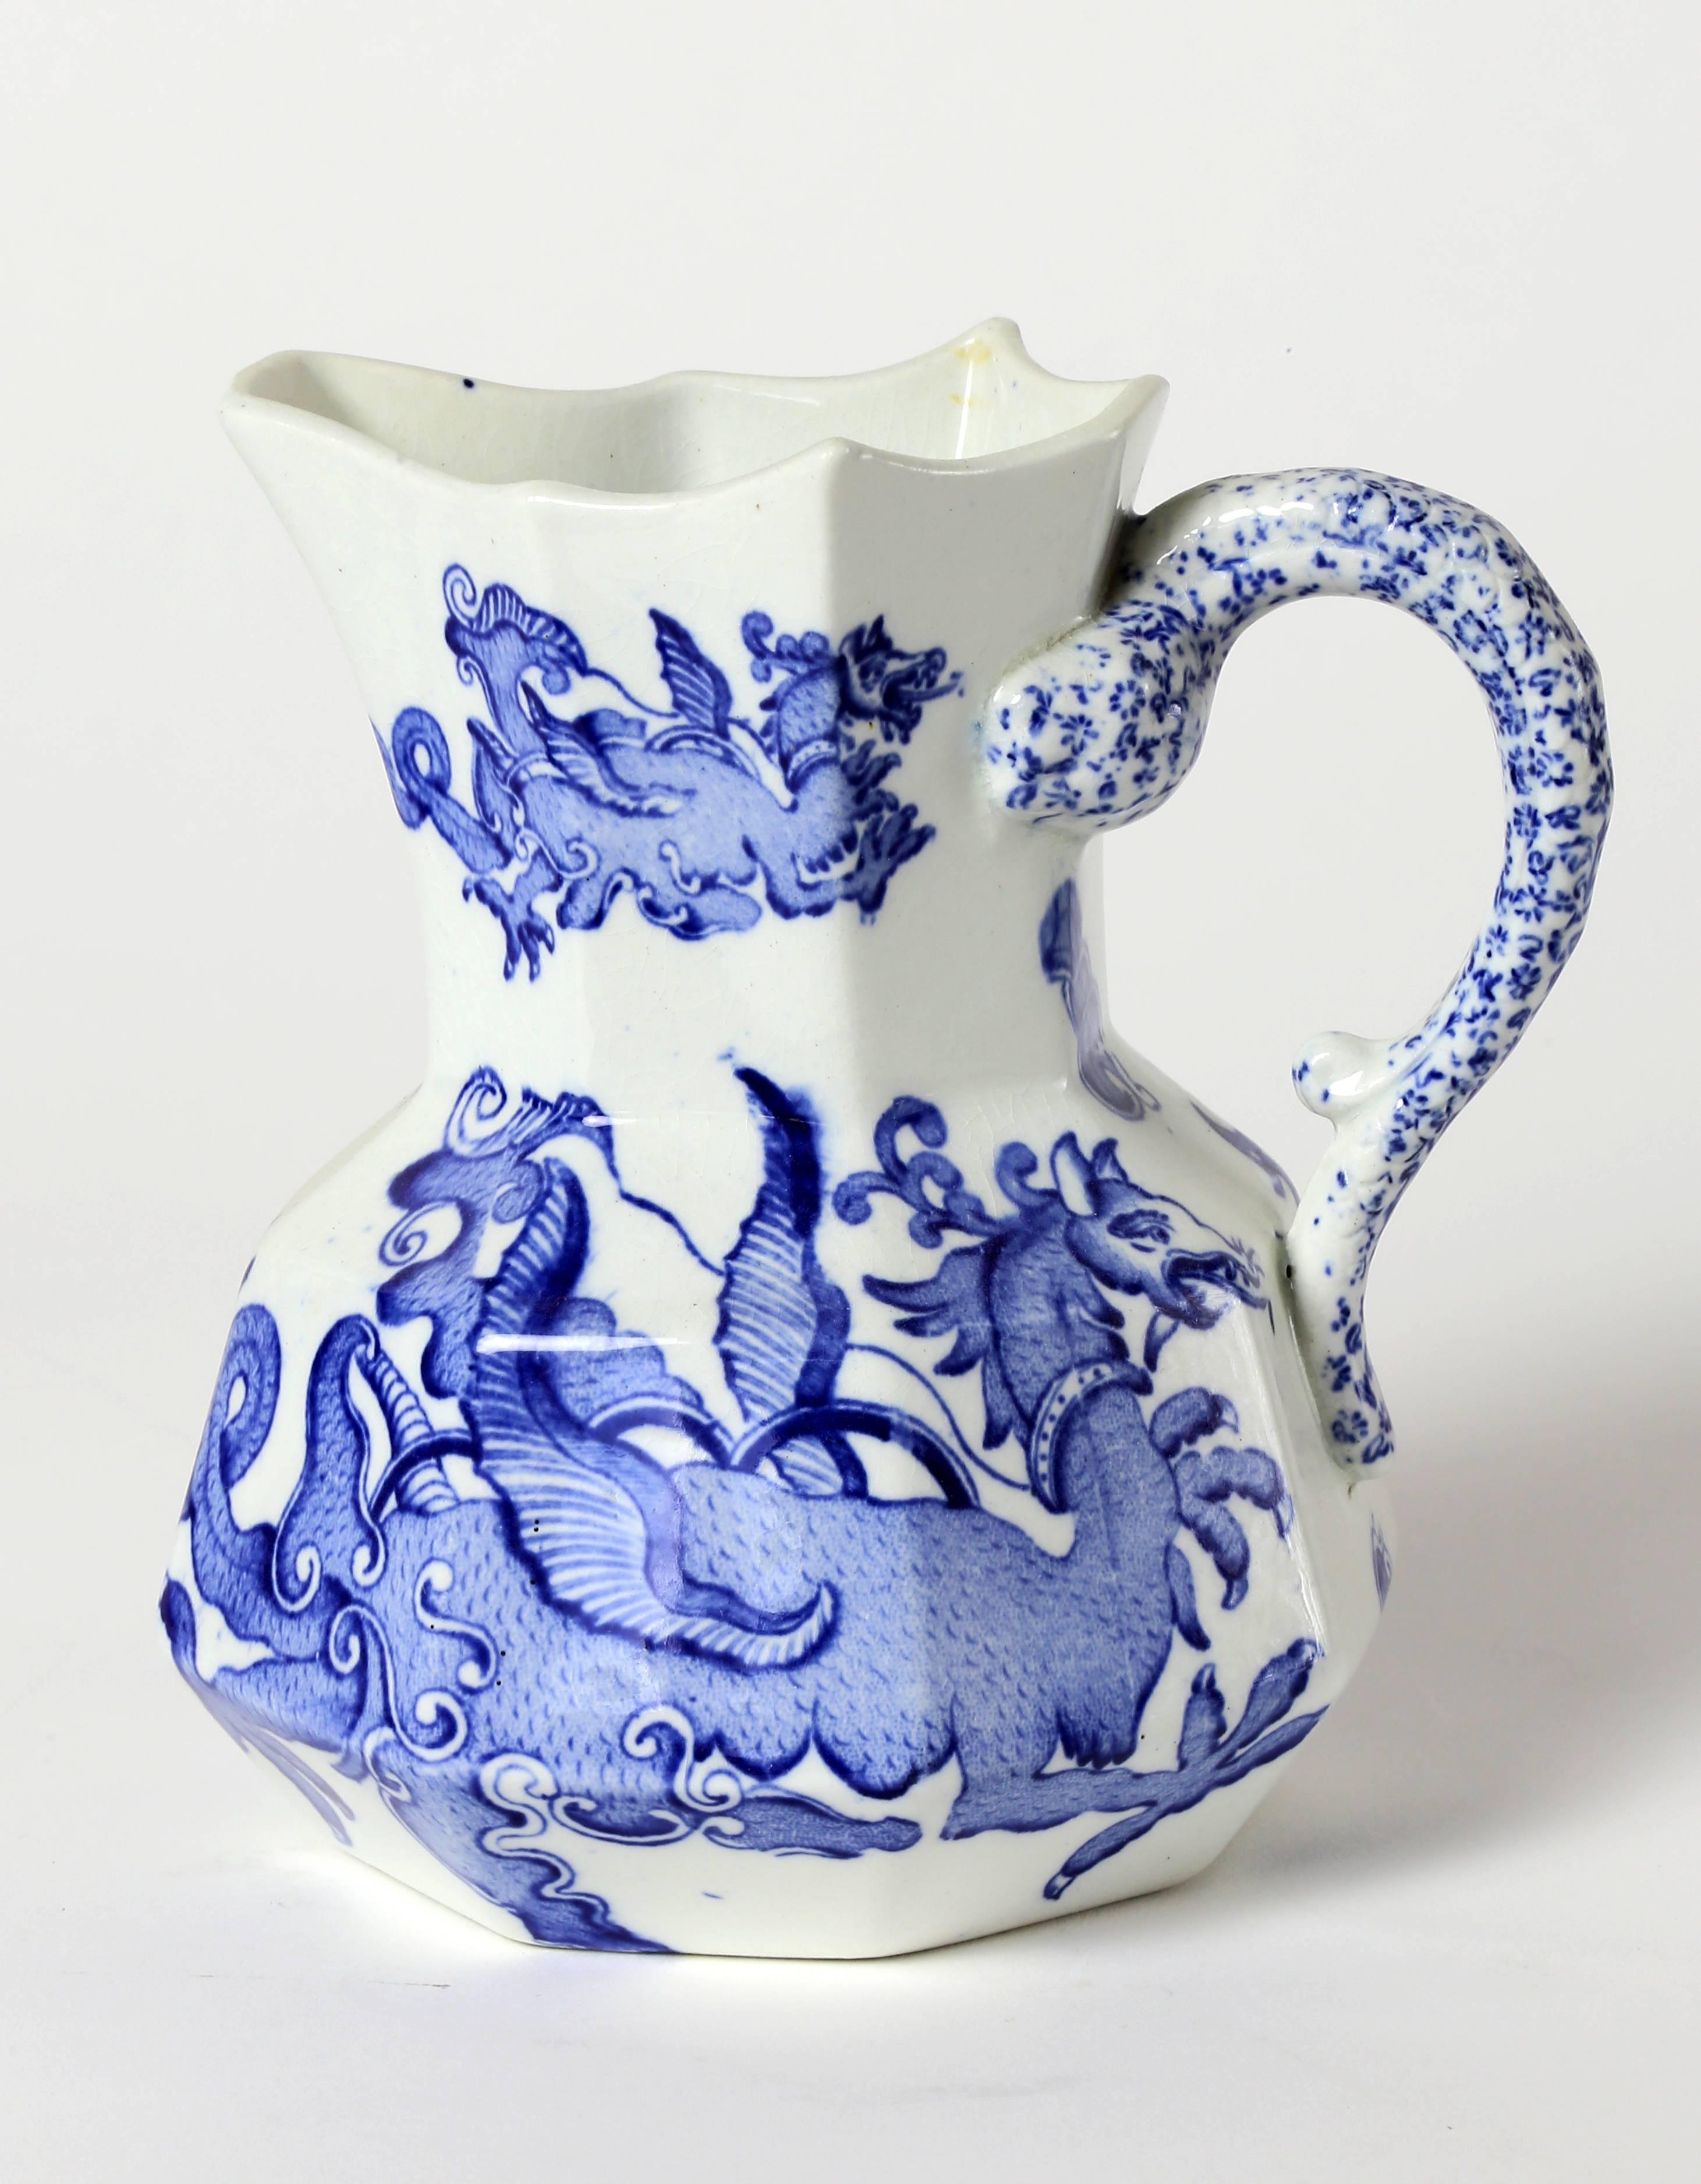 A set of three small ewers by Mason's Ironstone in the blue dragon pattern. They stand 4.5